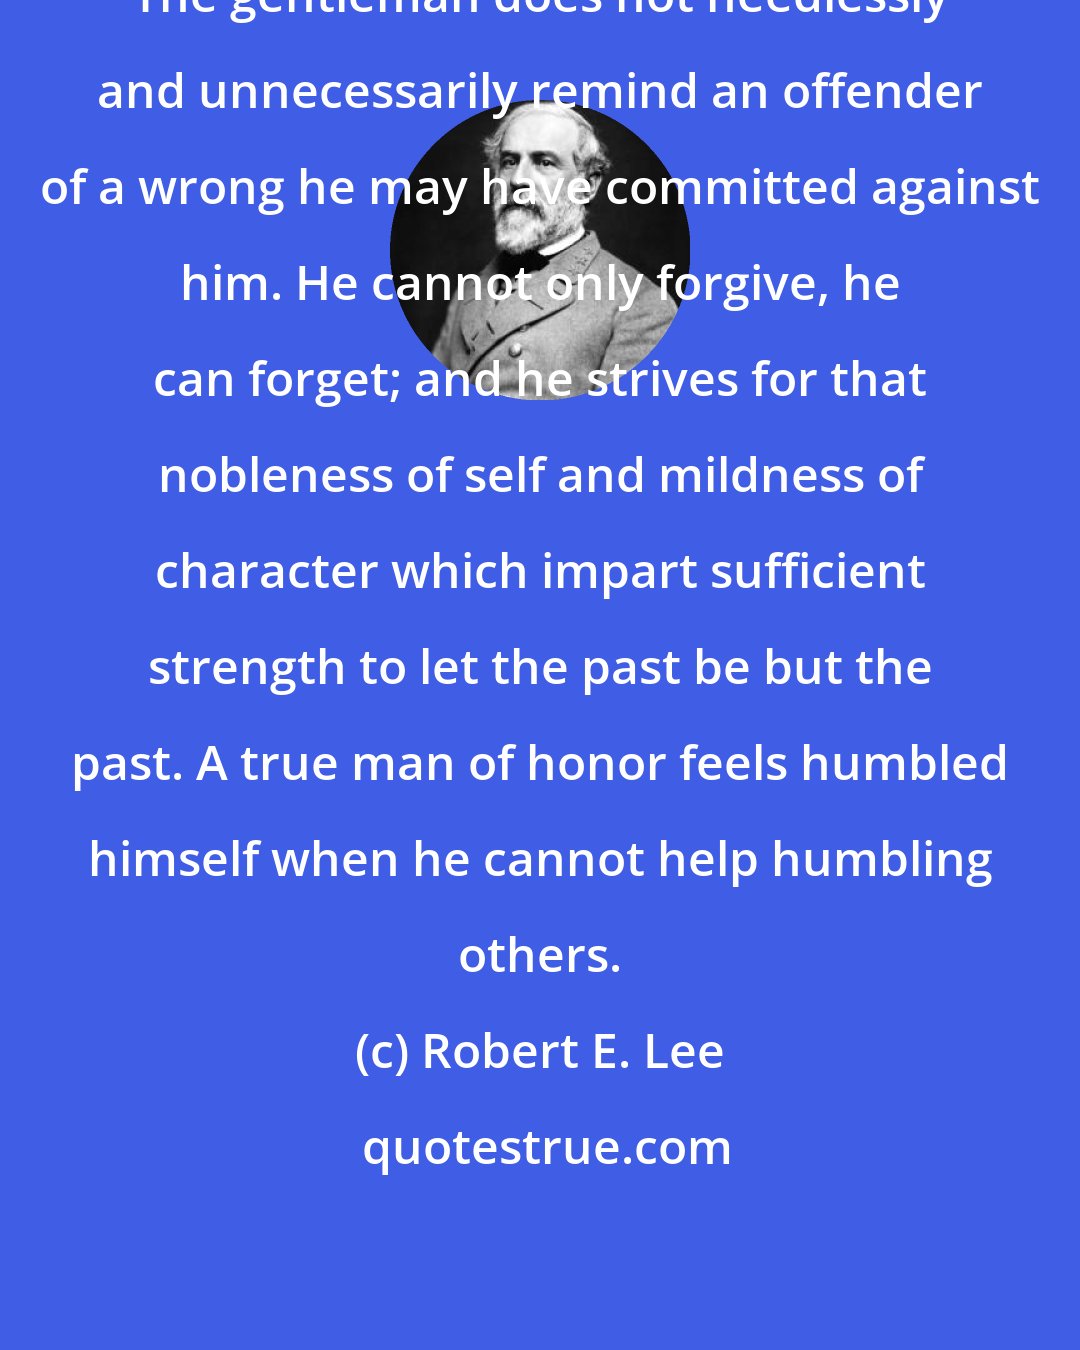 Robert E. Lee: The gentleman does not needlessly and unnecessarily remind an offender of a wrong he may have committed against him. He cannot only forgive, he can forget; and he strives for that nobleness of self and mildness of character which impart sufficient strength to let the past be but the past. A true man of honor feels humbled himself when he cannot help humbling others.